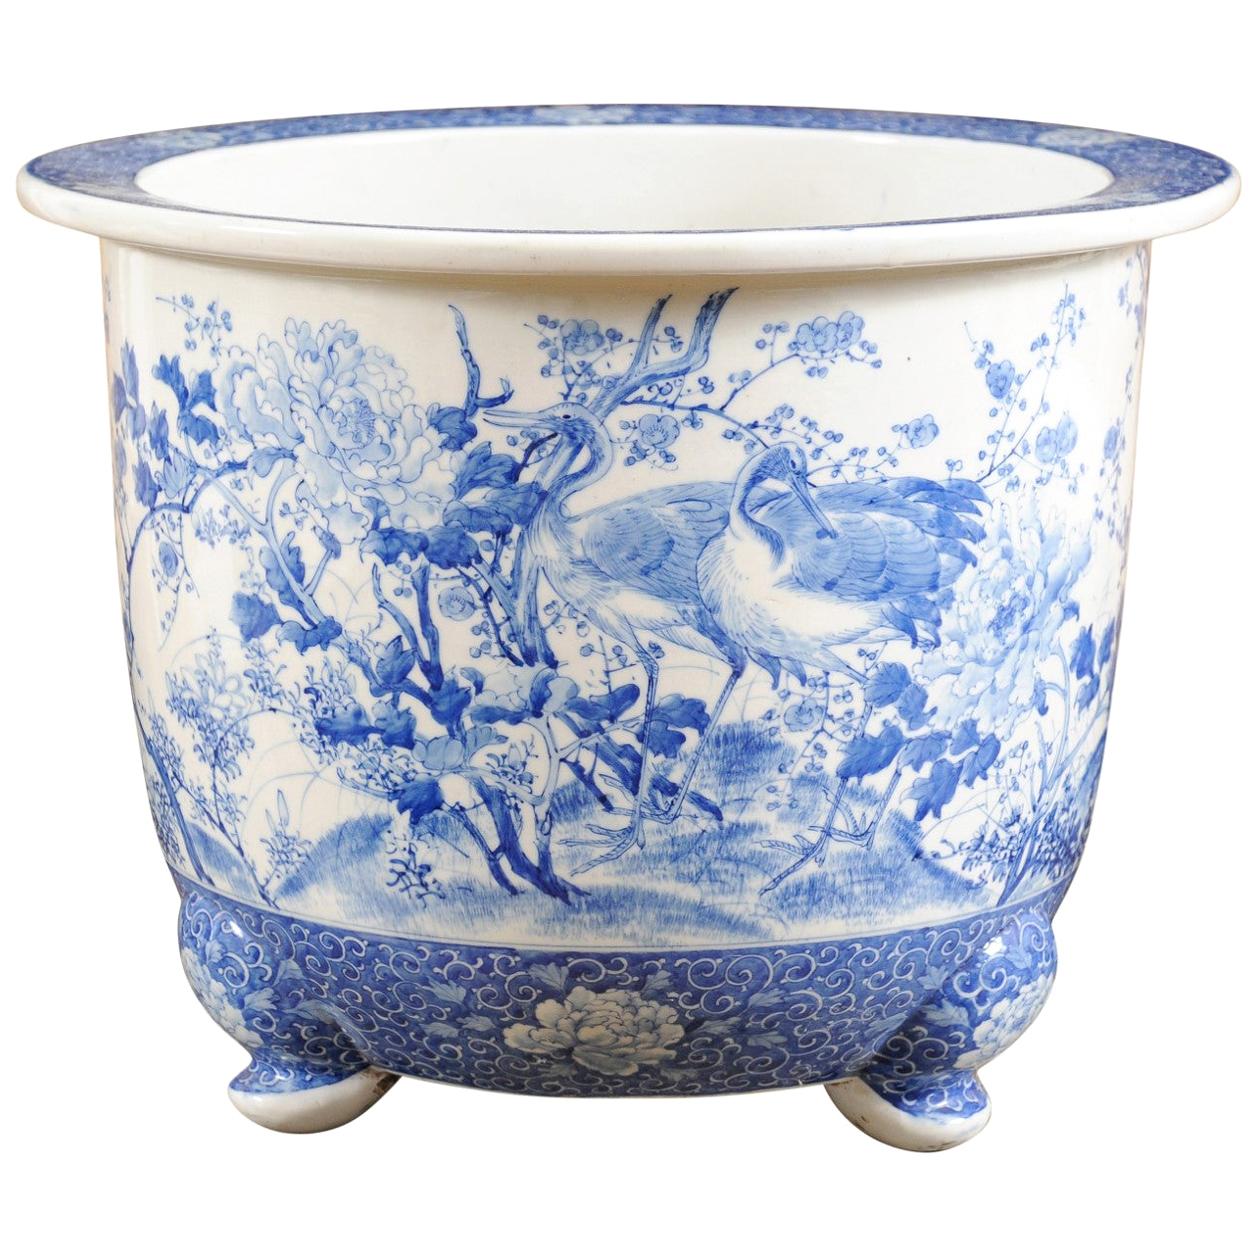 Chinese Late 19th Century Blue and White Planter with Herons, Birds and Flowers